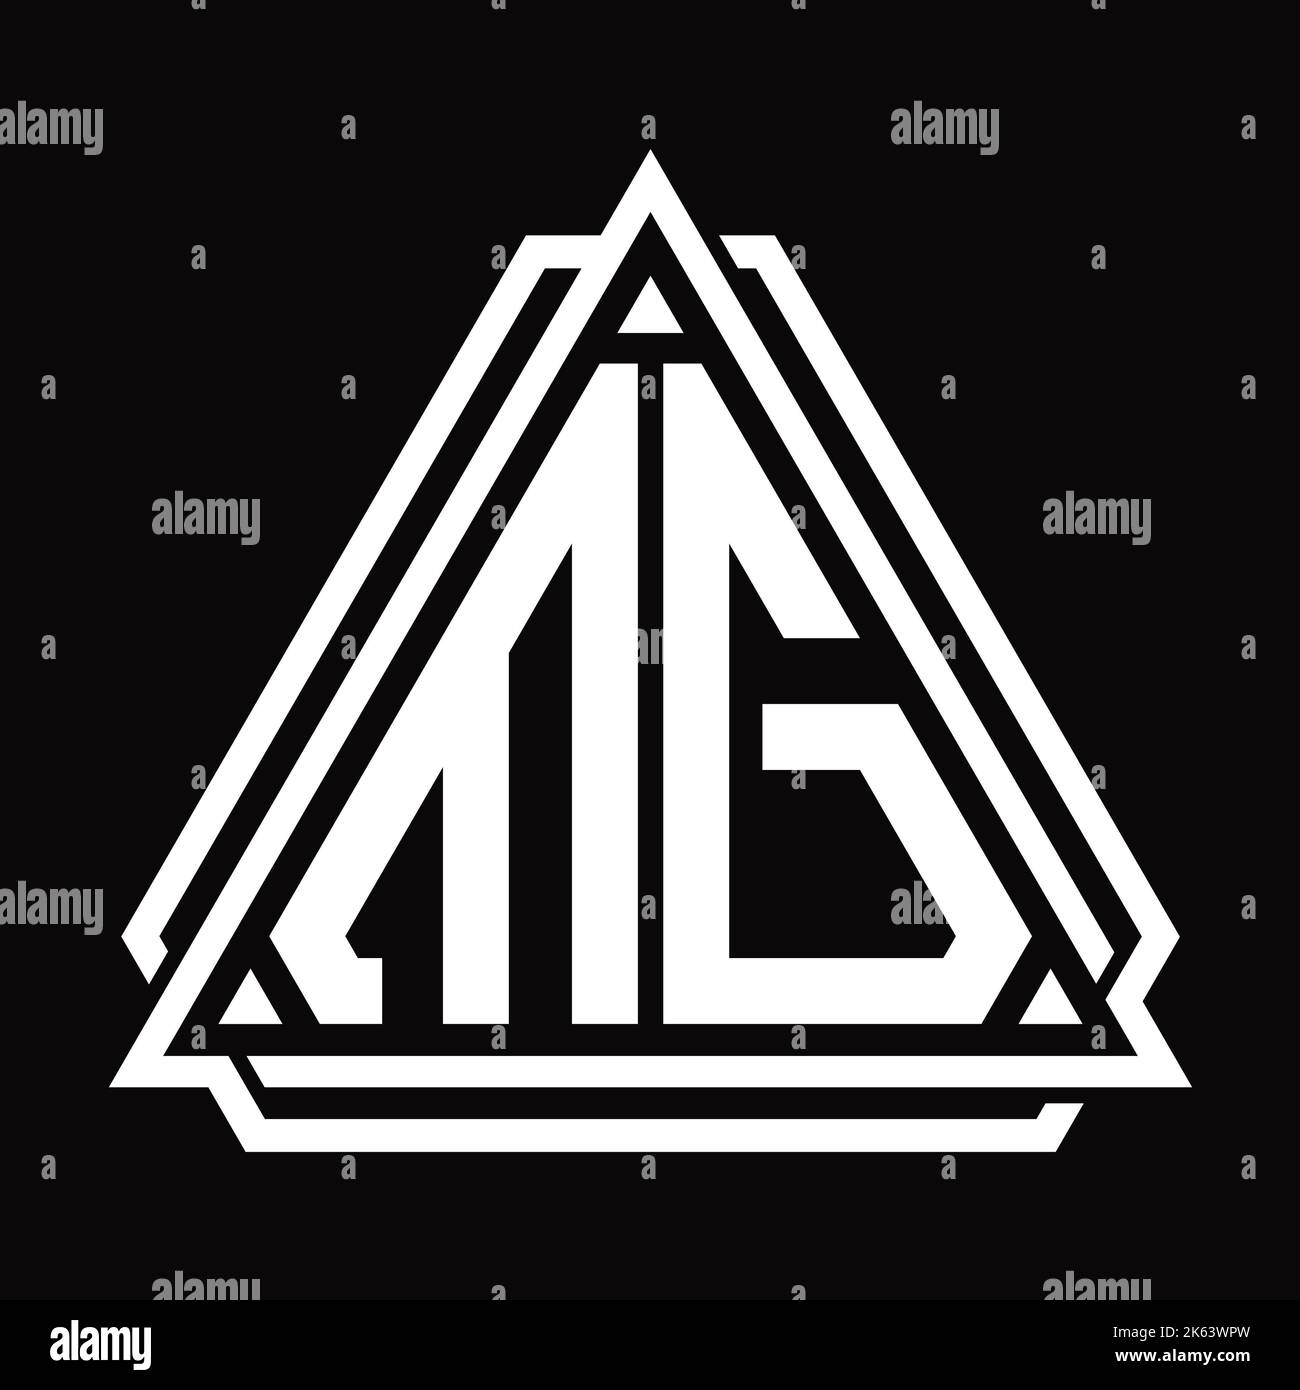 MG Logo monogram drops crown abstract shape vector images design template  Stock Photo - Alamy